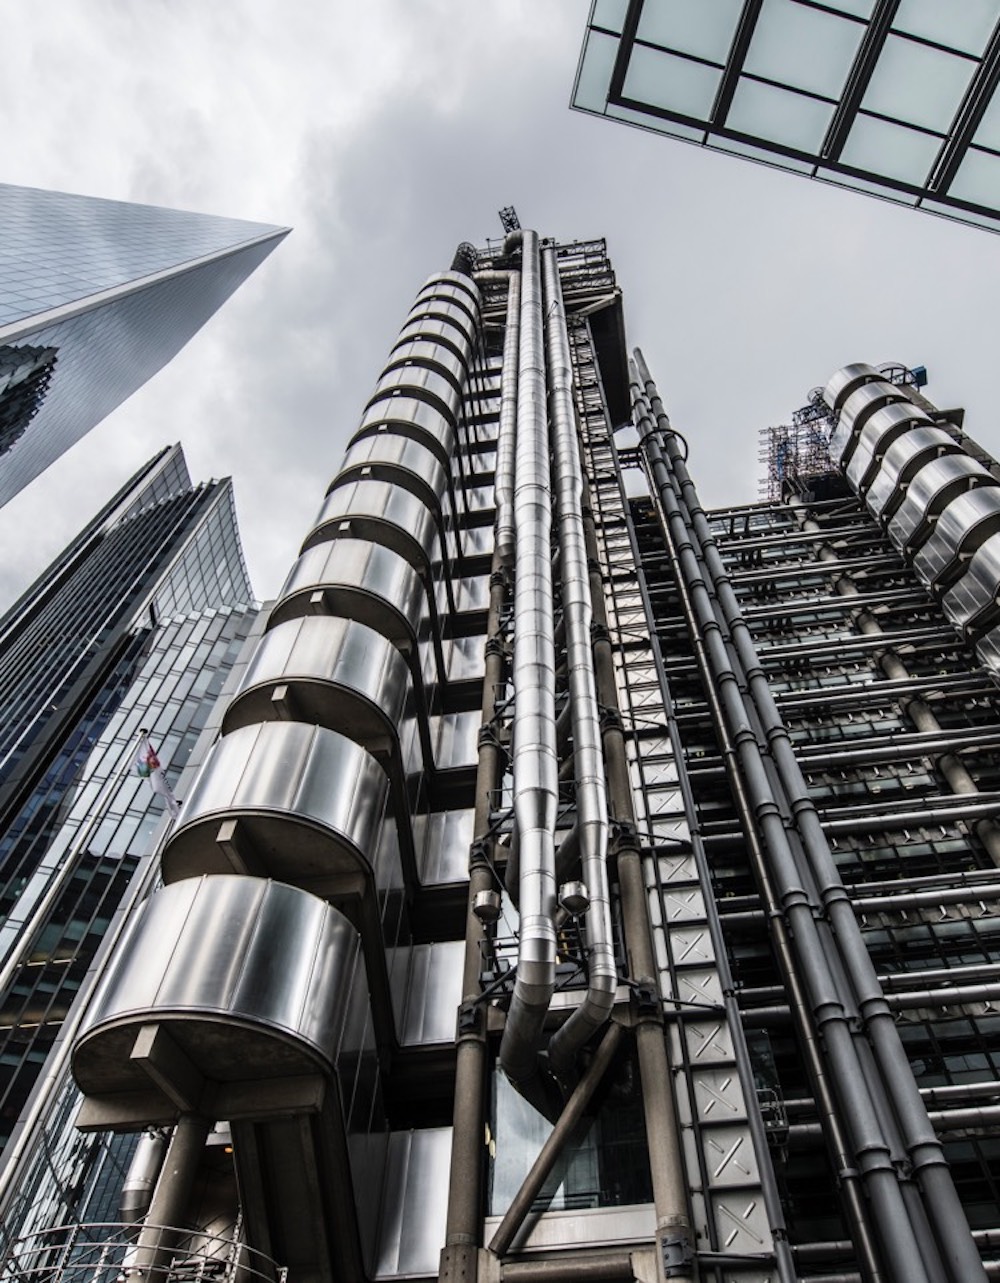 Letter to Lloyd’s on its inadequate ‘ESG’ policy